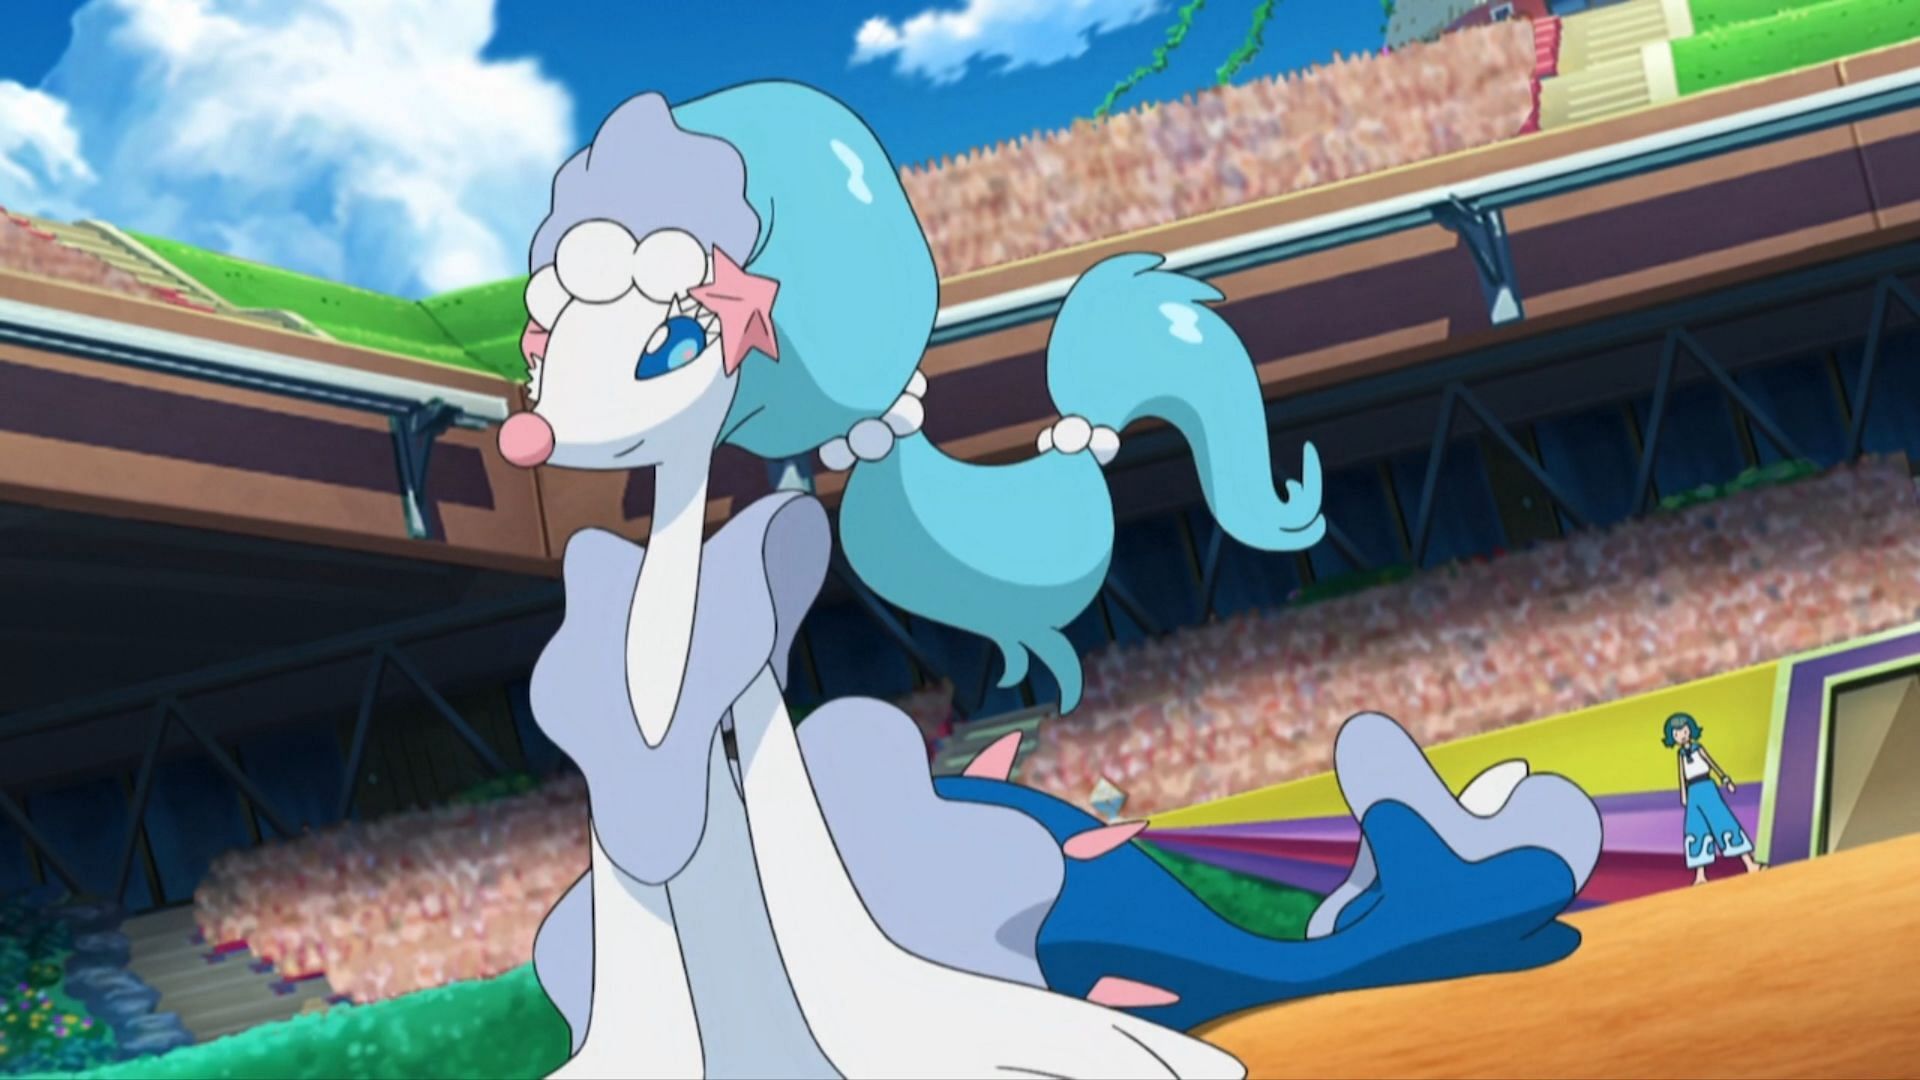 Primarina could also return in the DLC, assuming the datamine and theory are accurate (Image via OLM, Inc)